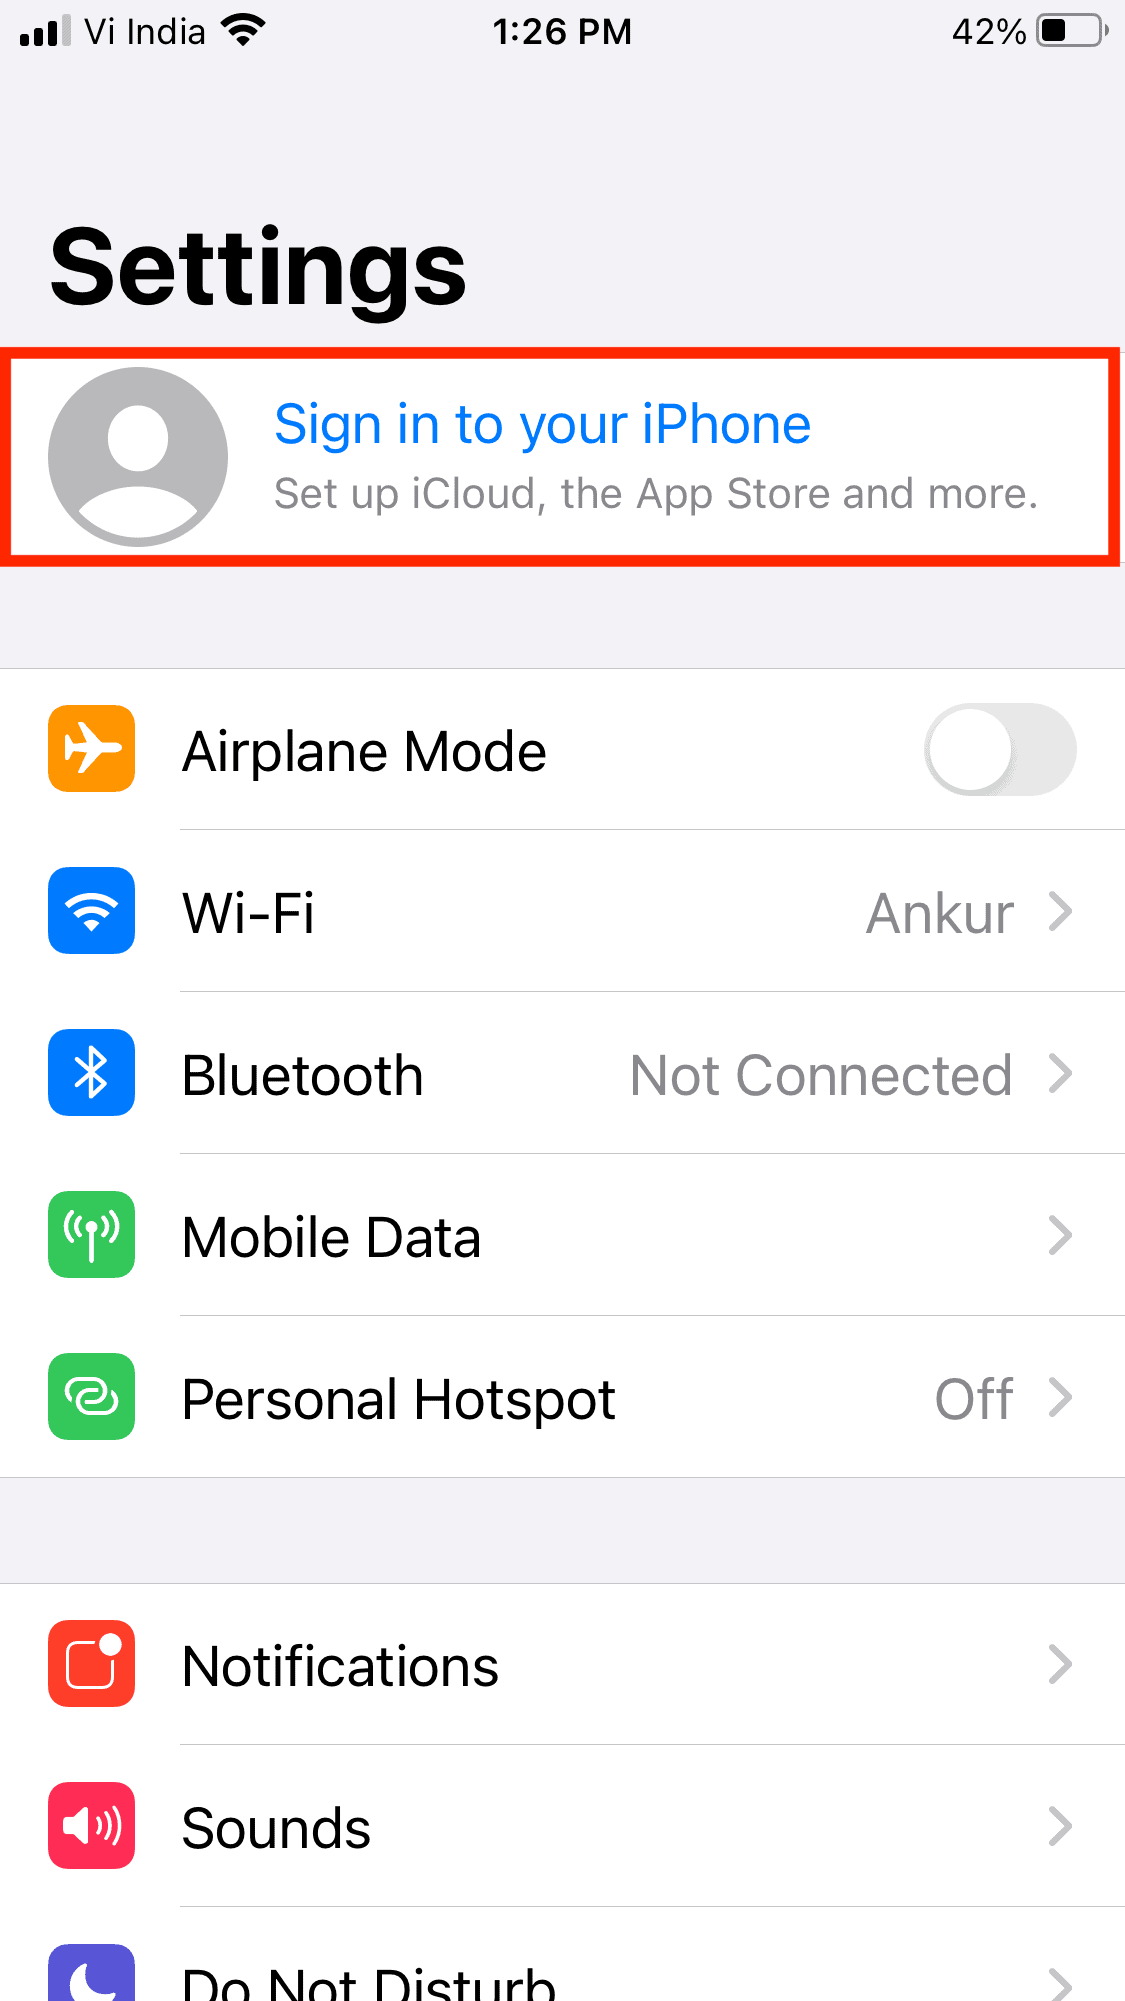 Sign in to your iPhone in the Settings app